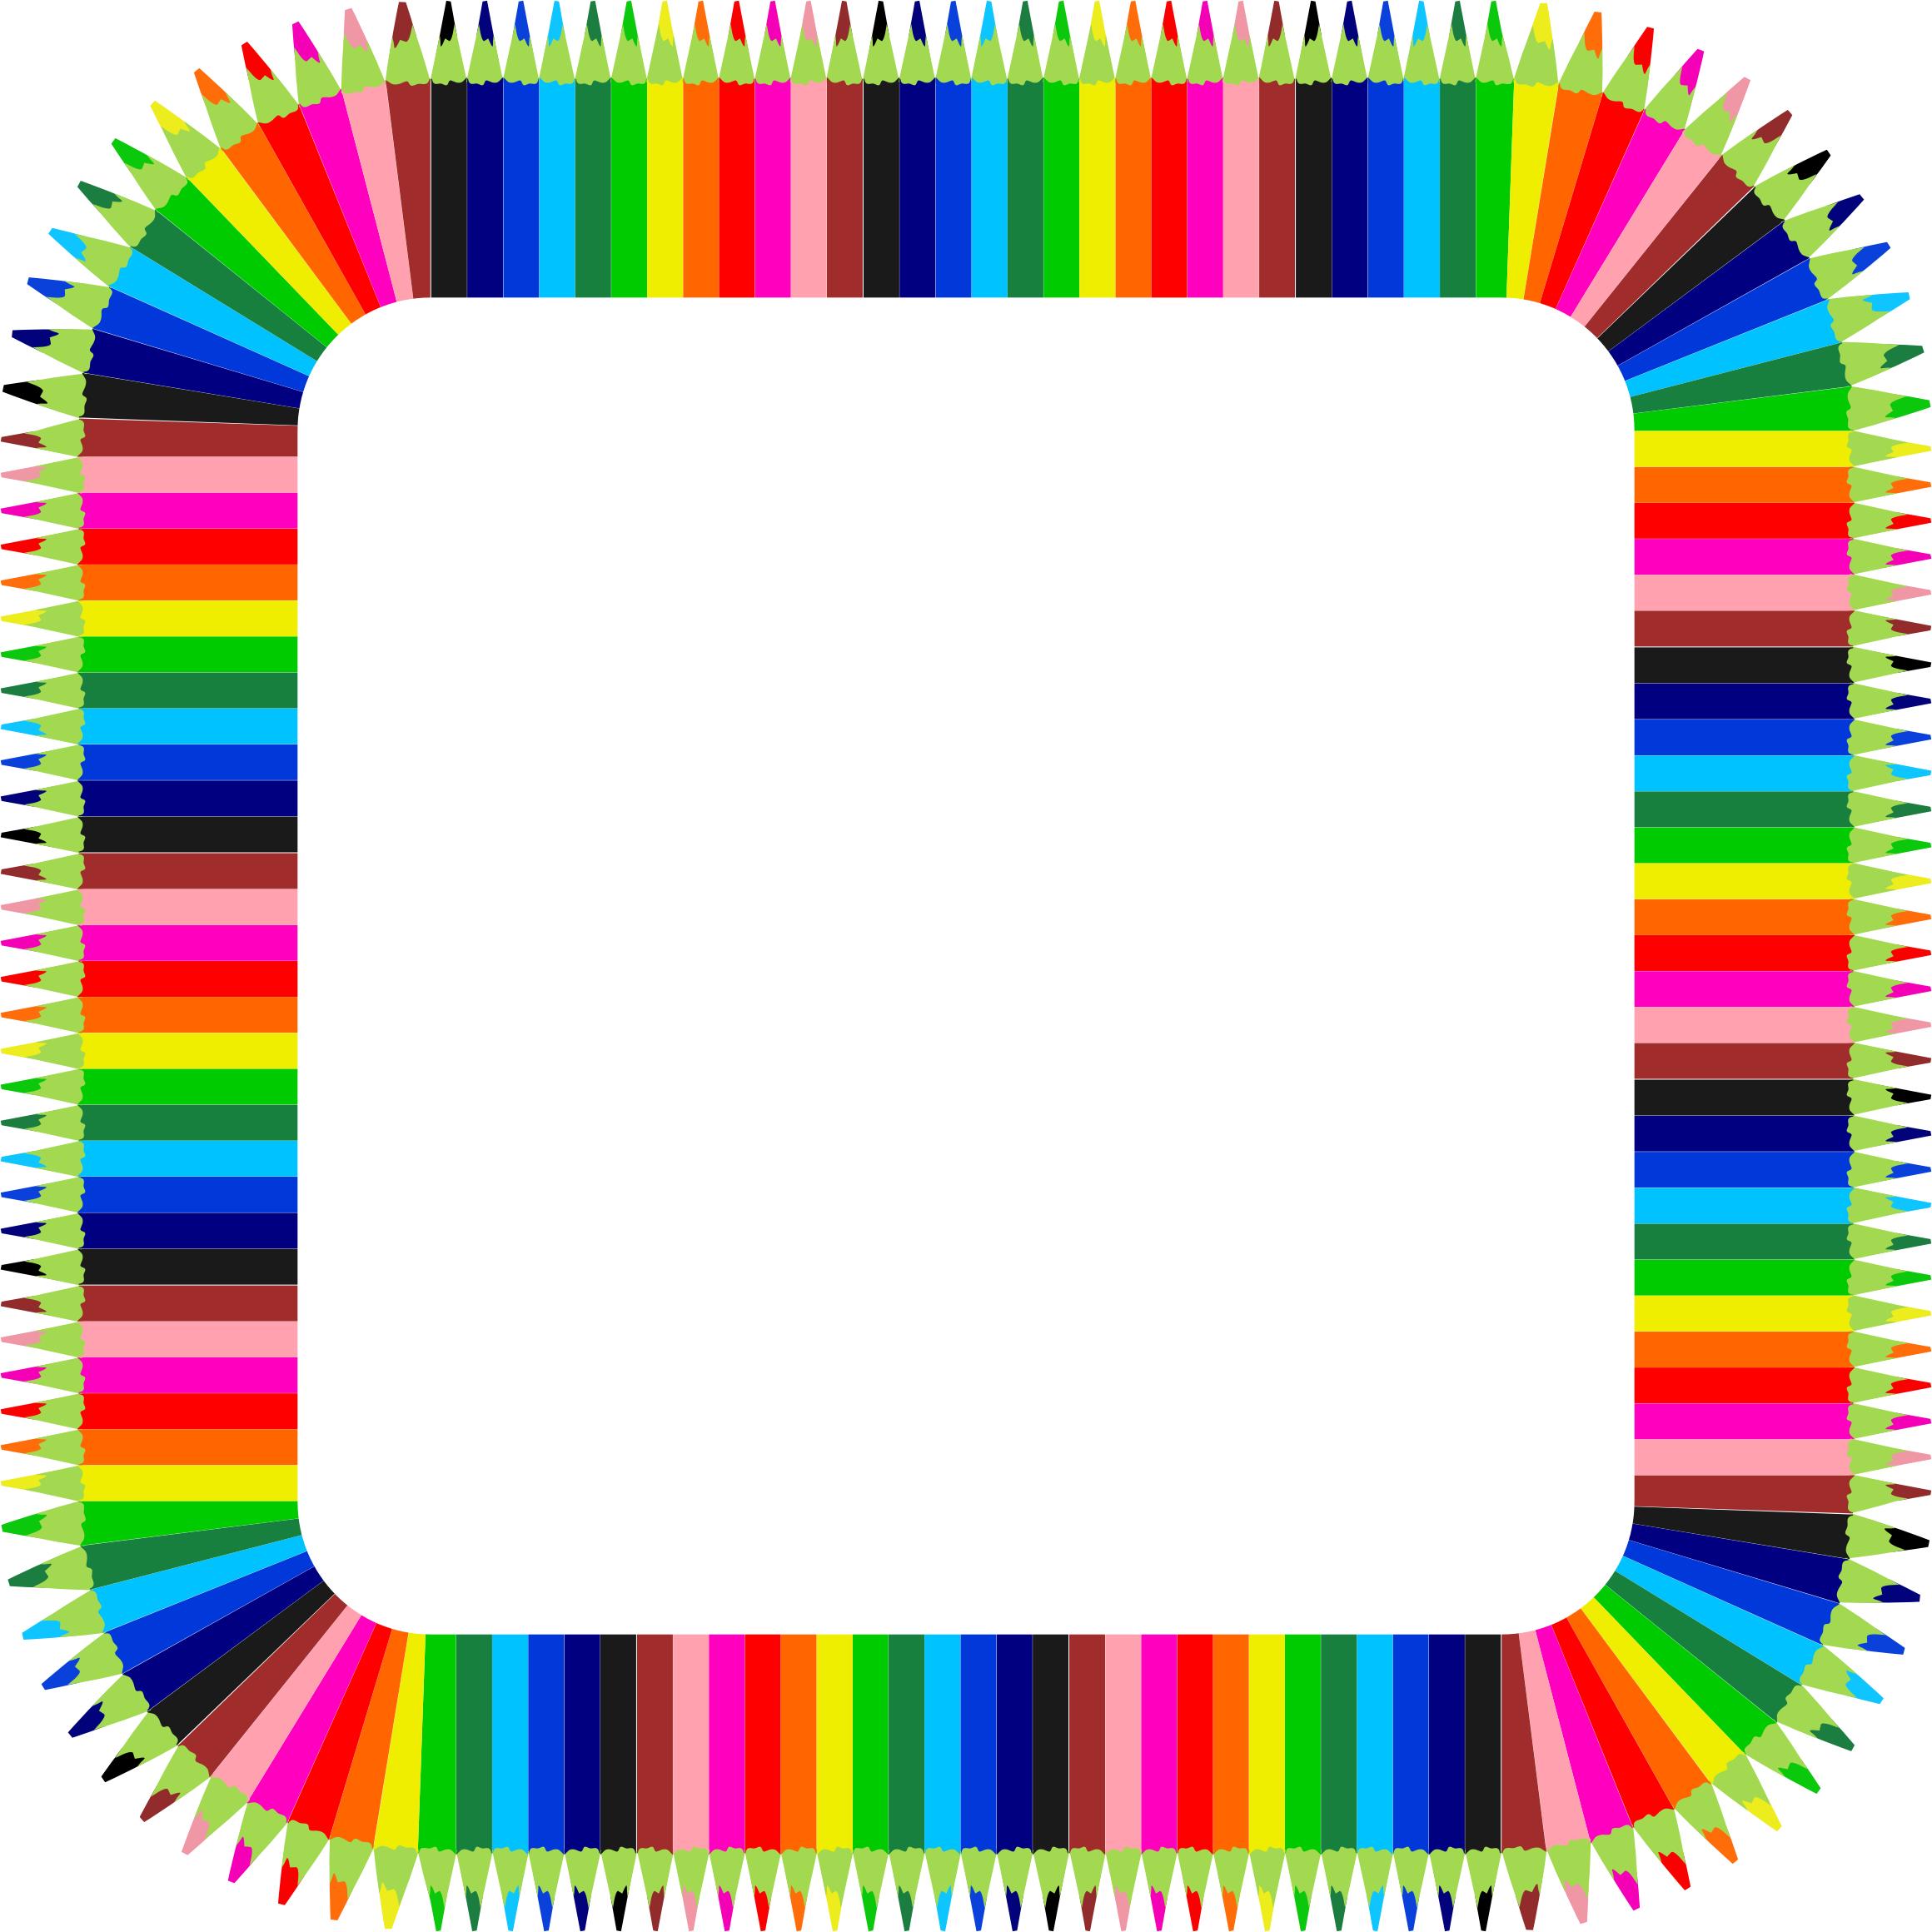 Colorful Pencils Frame icons